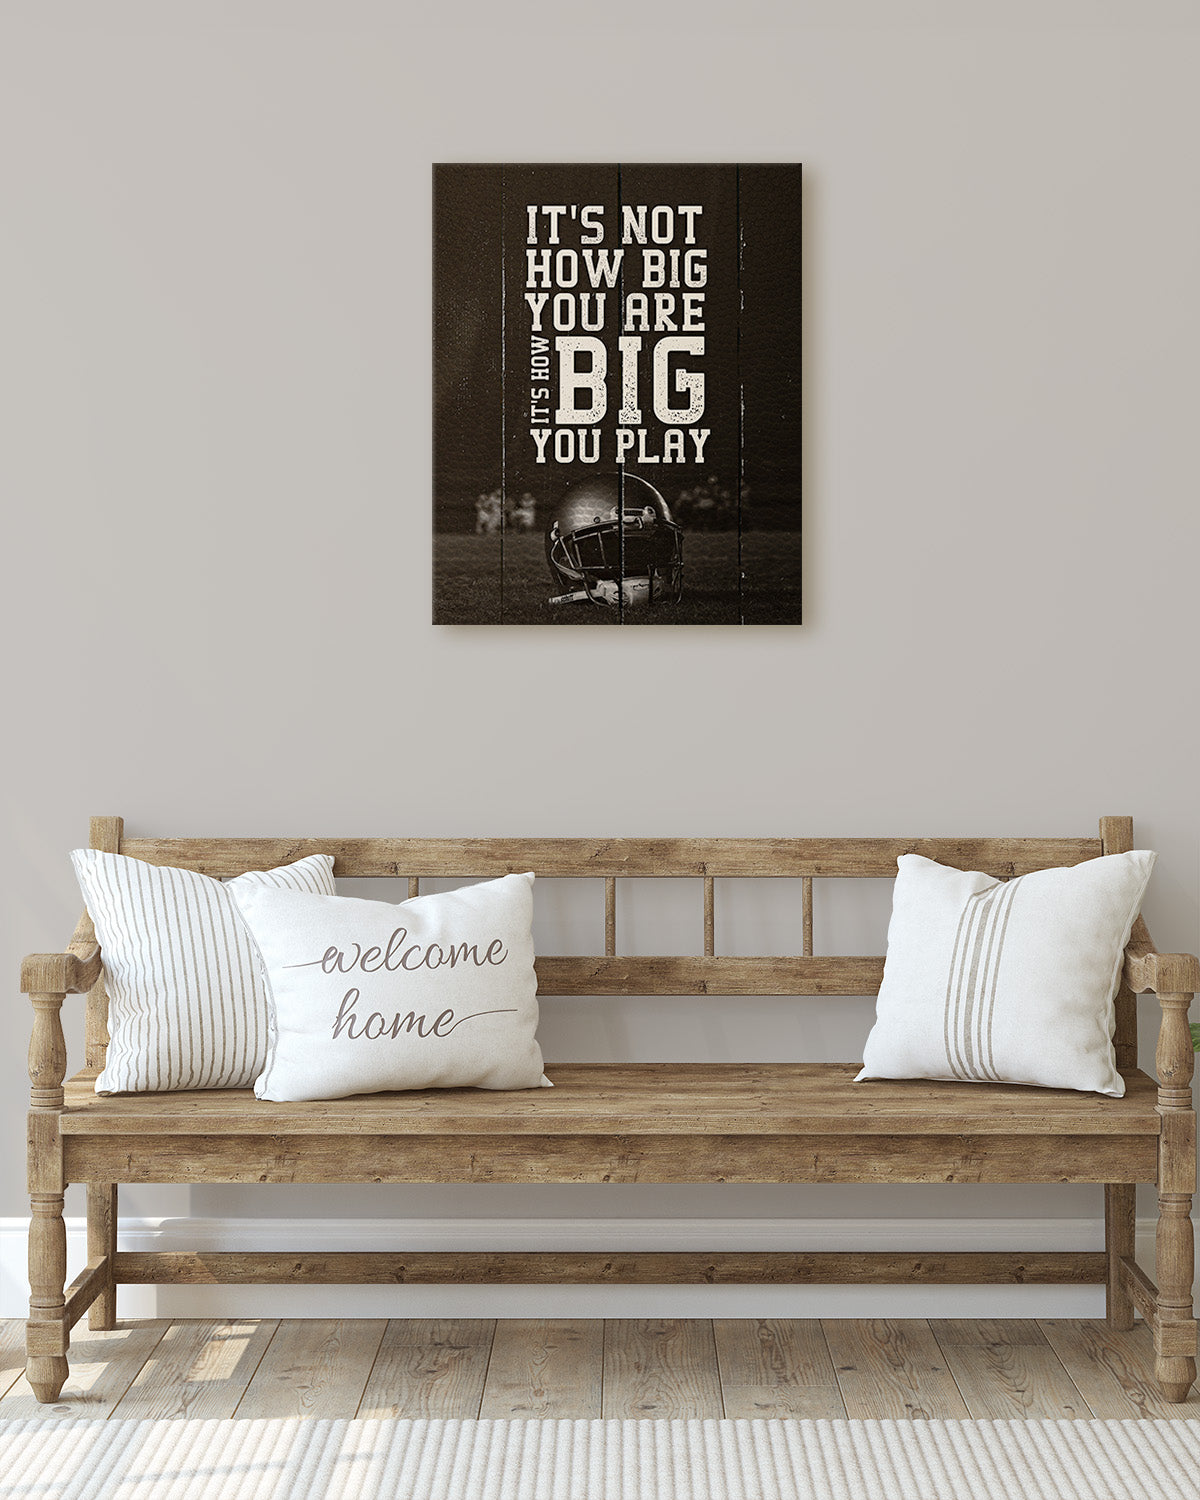 Football Inspirational Wall Art for Boys, Kids Room, Family or Game Room, Man Cave, Den - Teen Room Decor - Home Decor Gift for Sports Fans, Football Players